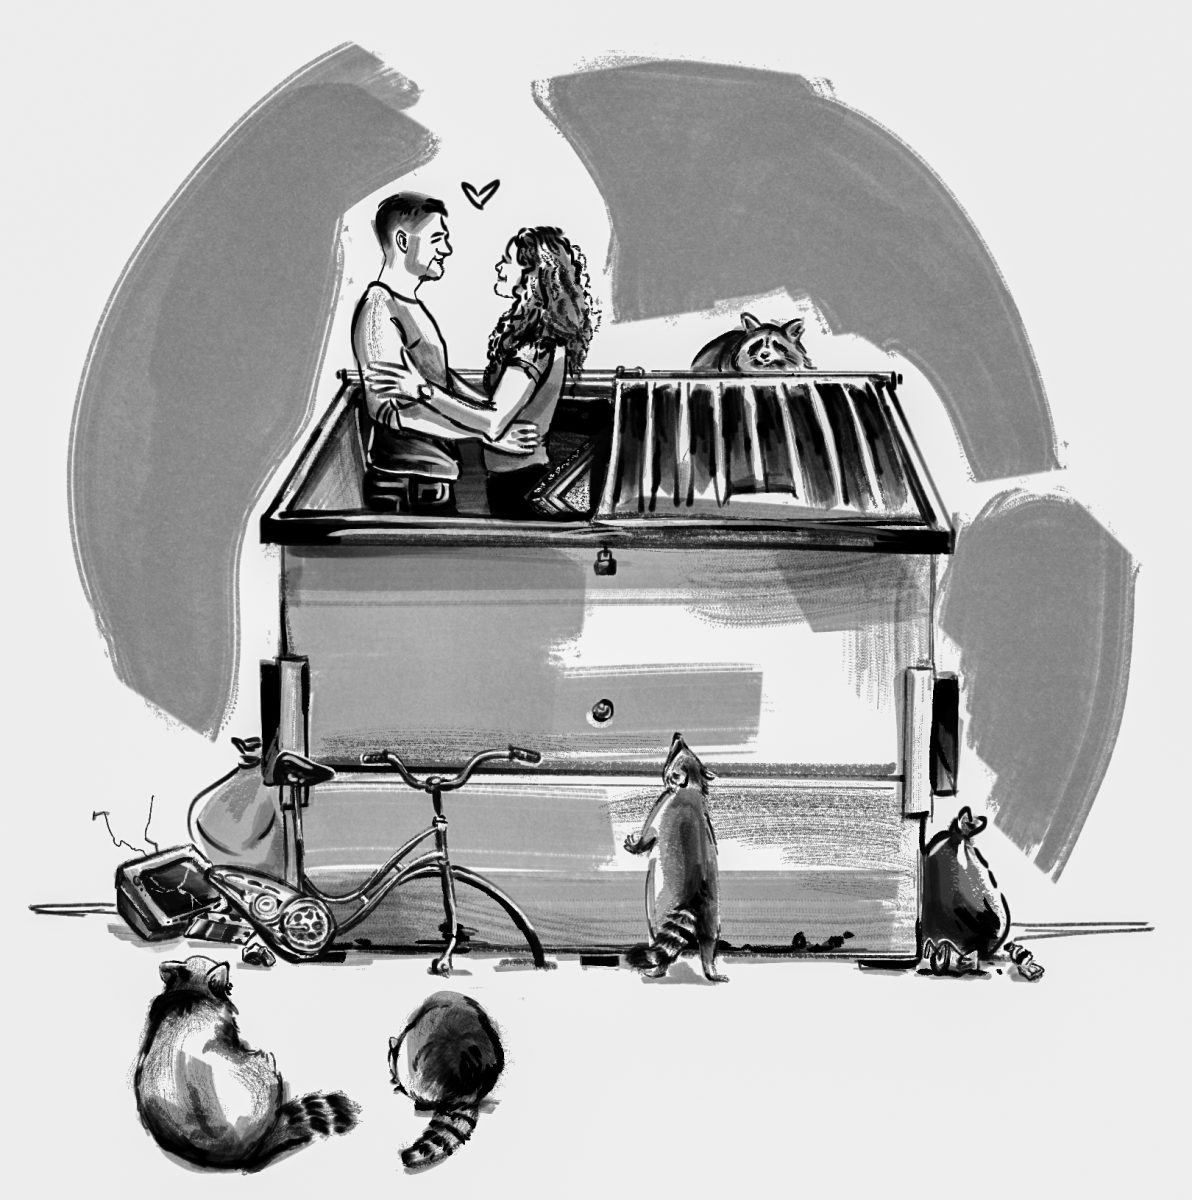 An excited couple stands in a dumpster surrounded by various treasures and trash. Illustration by Bianca Oppedisano / Mass Media Staff.